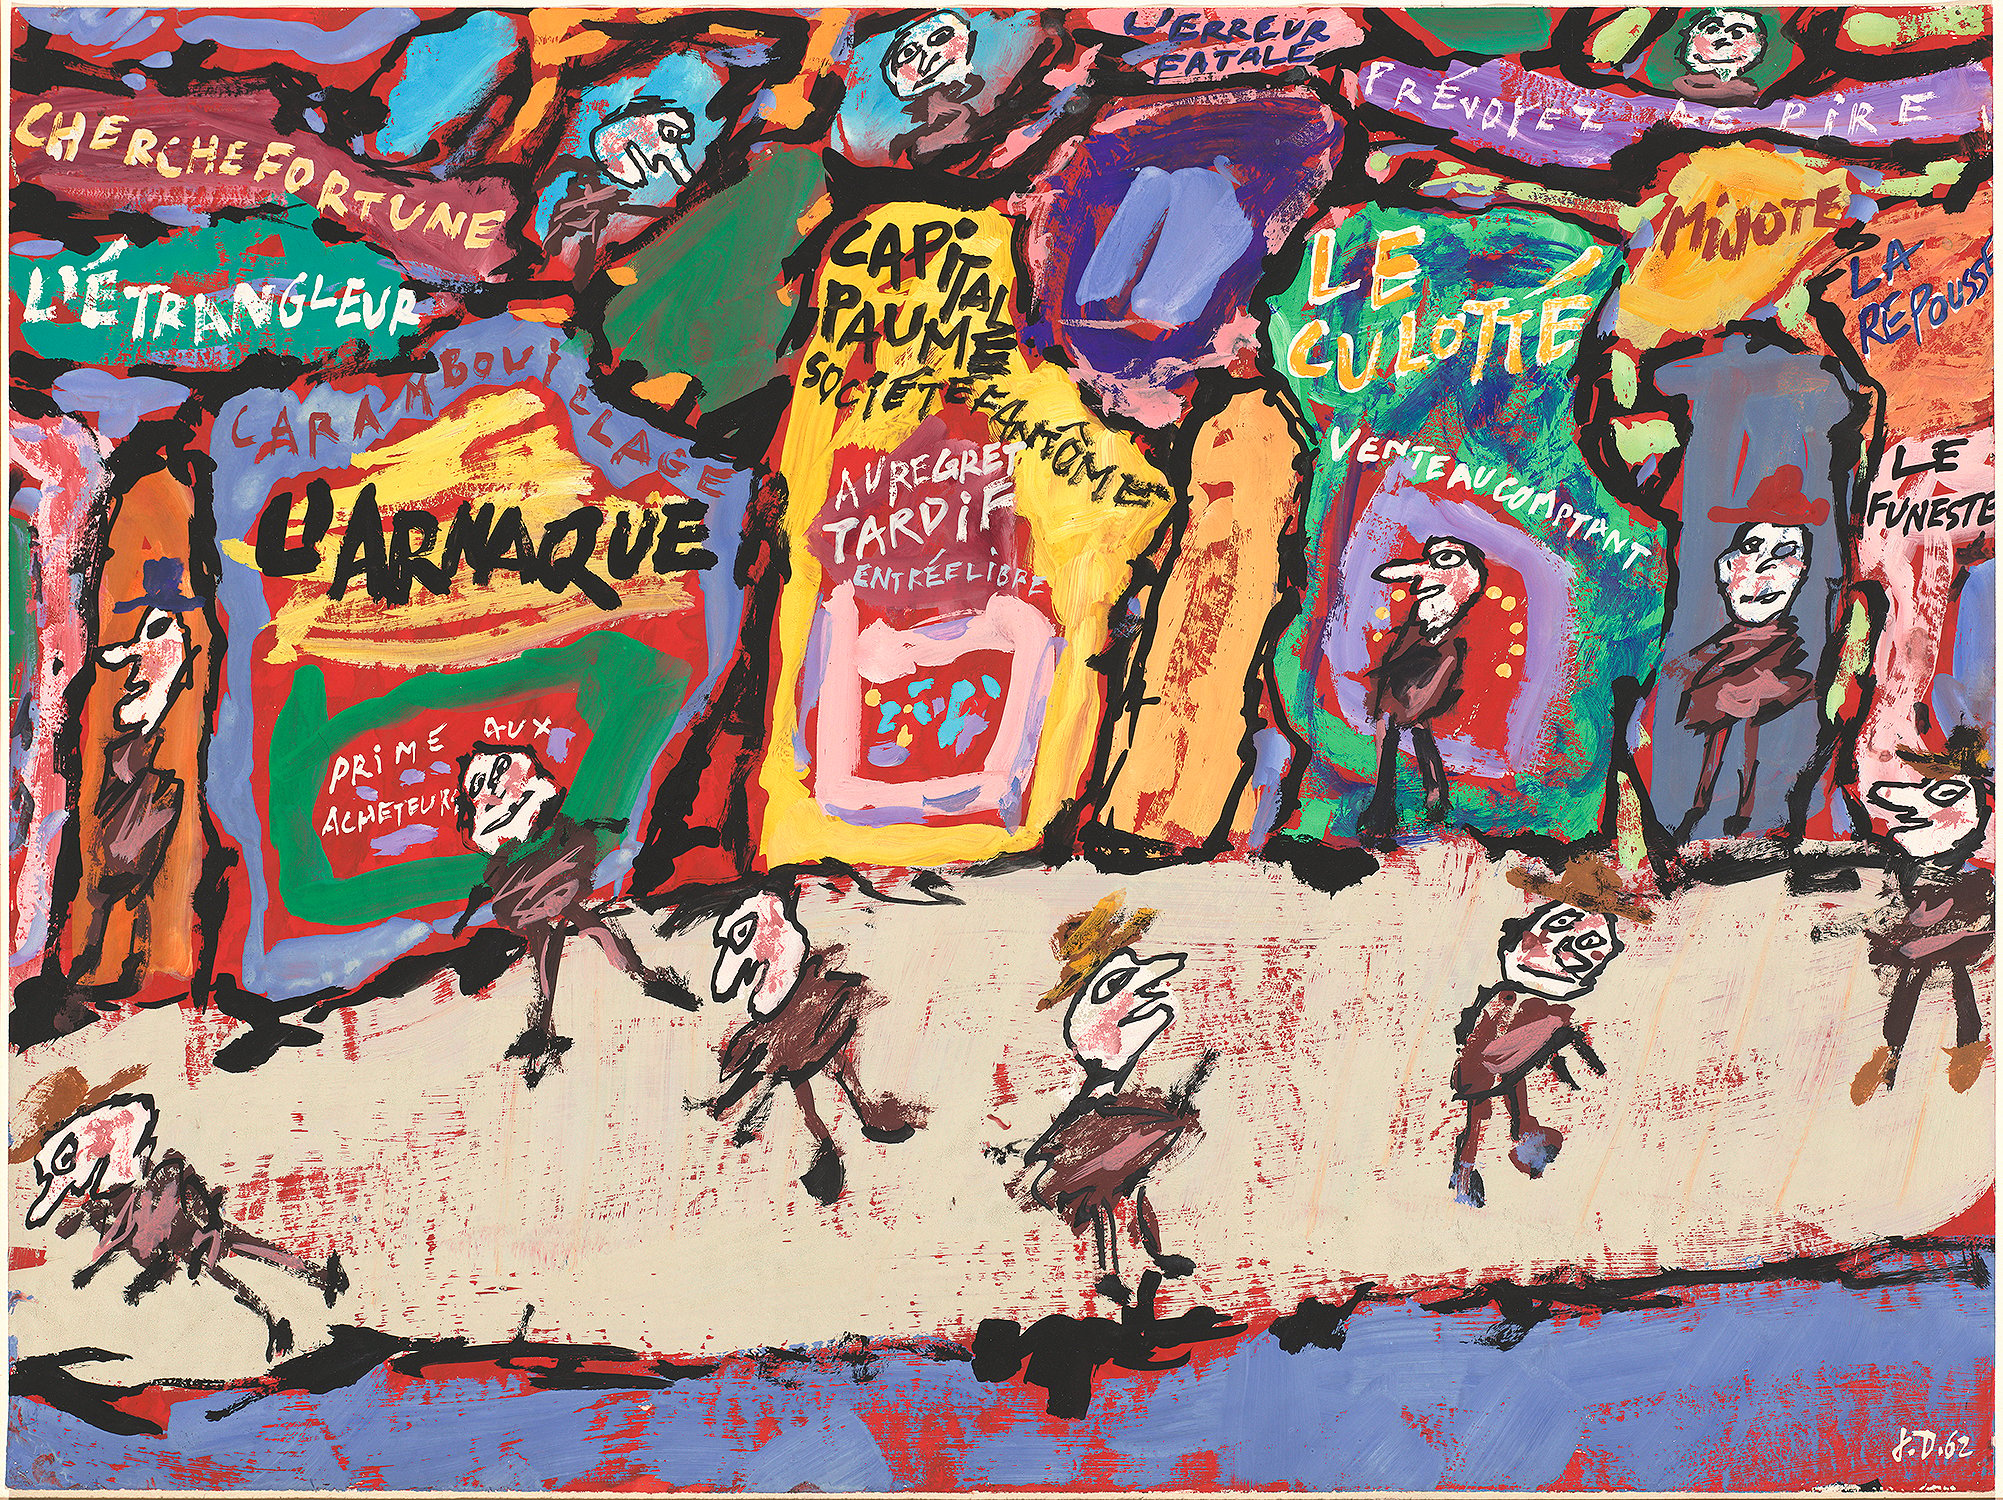 Jean Dubuffet, L’Arnaque (The Swindle), June 2, 1962. © 2016 Artists Rights Society (ARS), New York / ADAGP, Paris. 